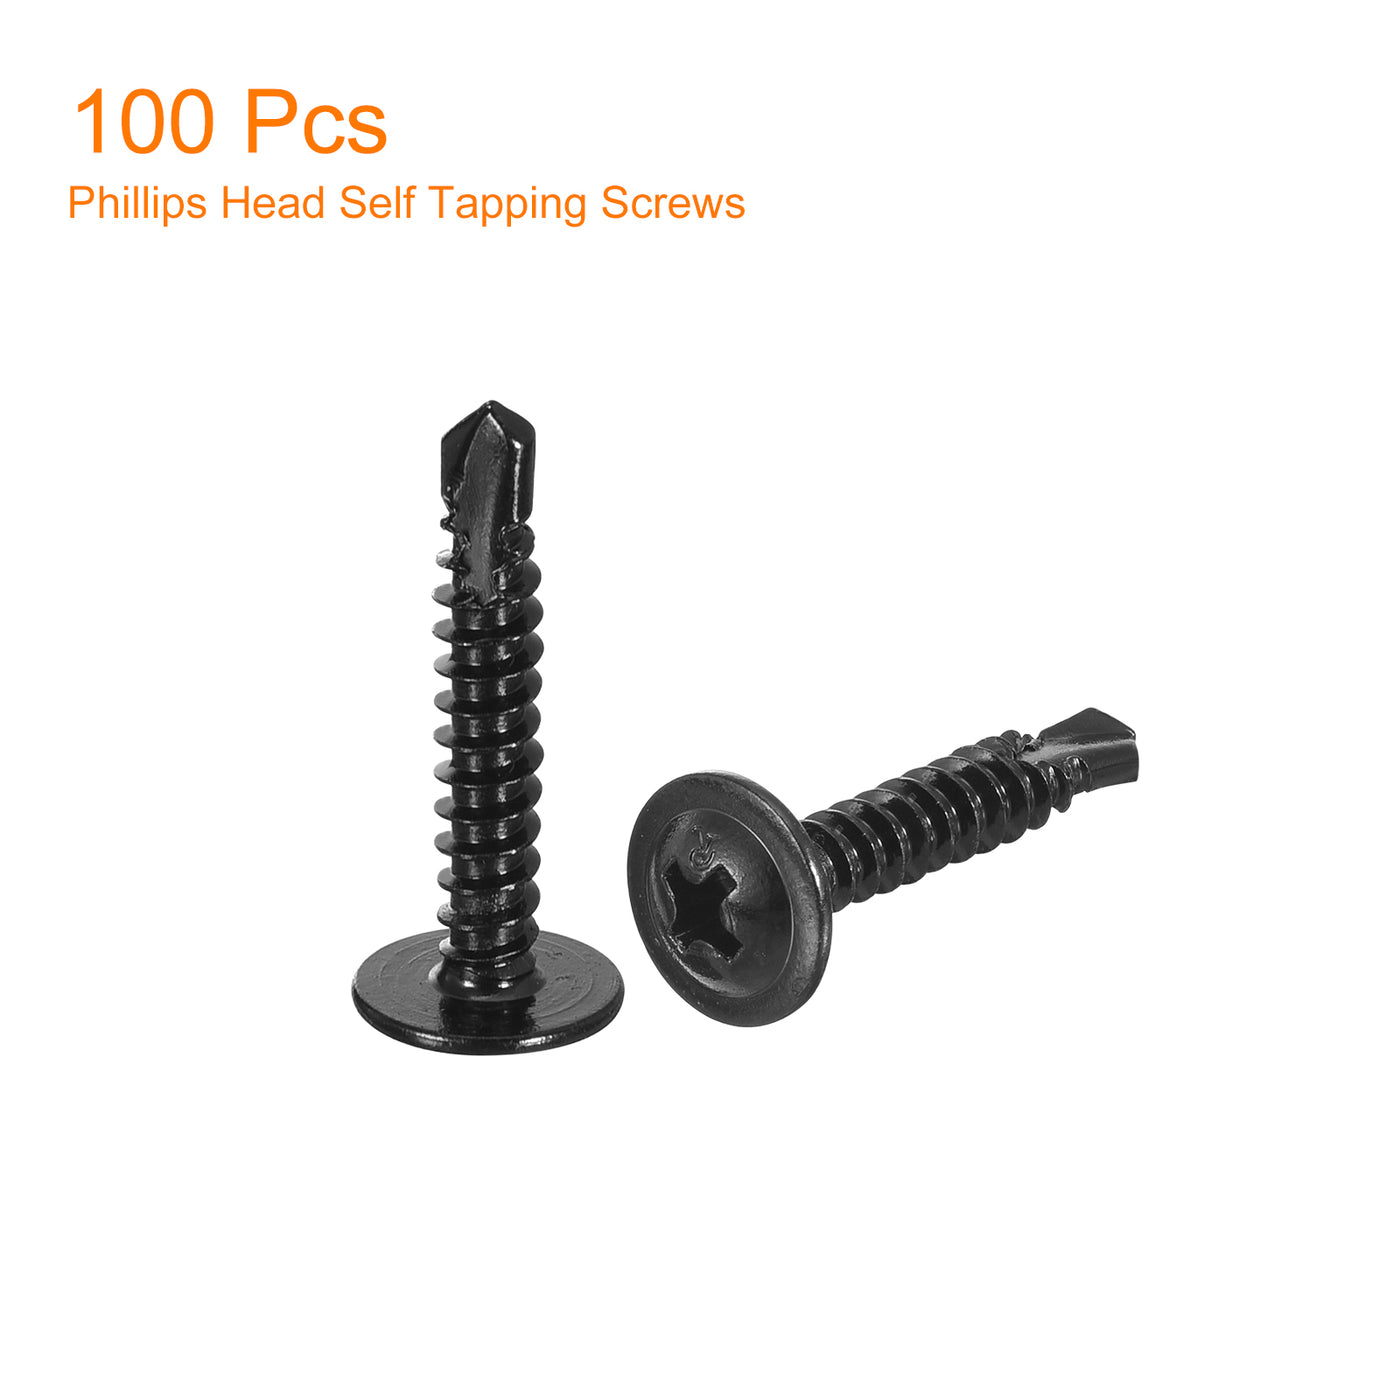 uxcell Uxcell Phillips Head Self Tapping Screws, 100pcs #8x1" Sheet Metal Screw